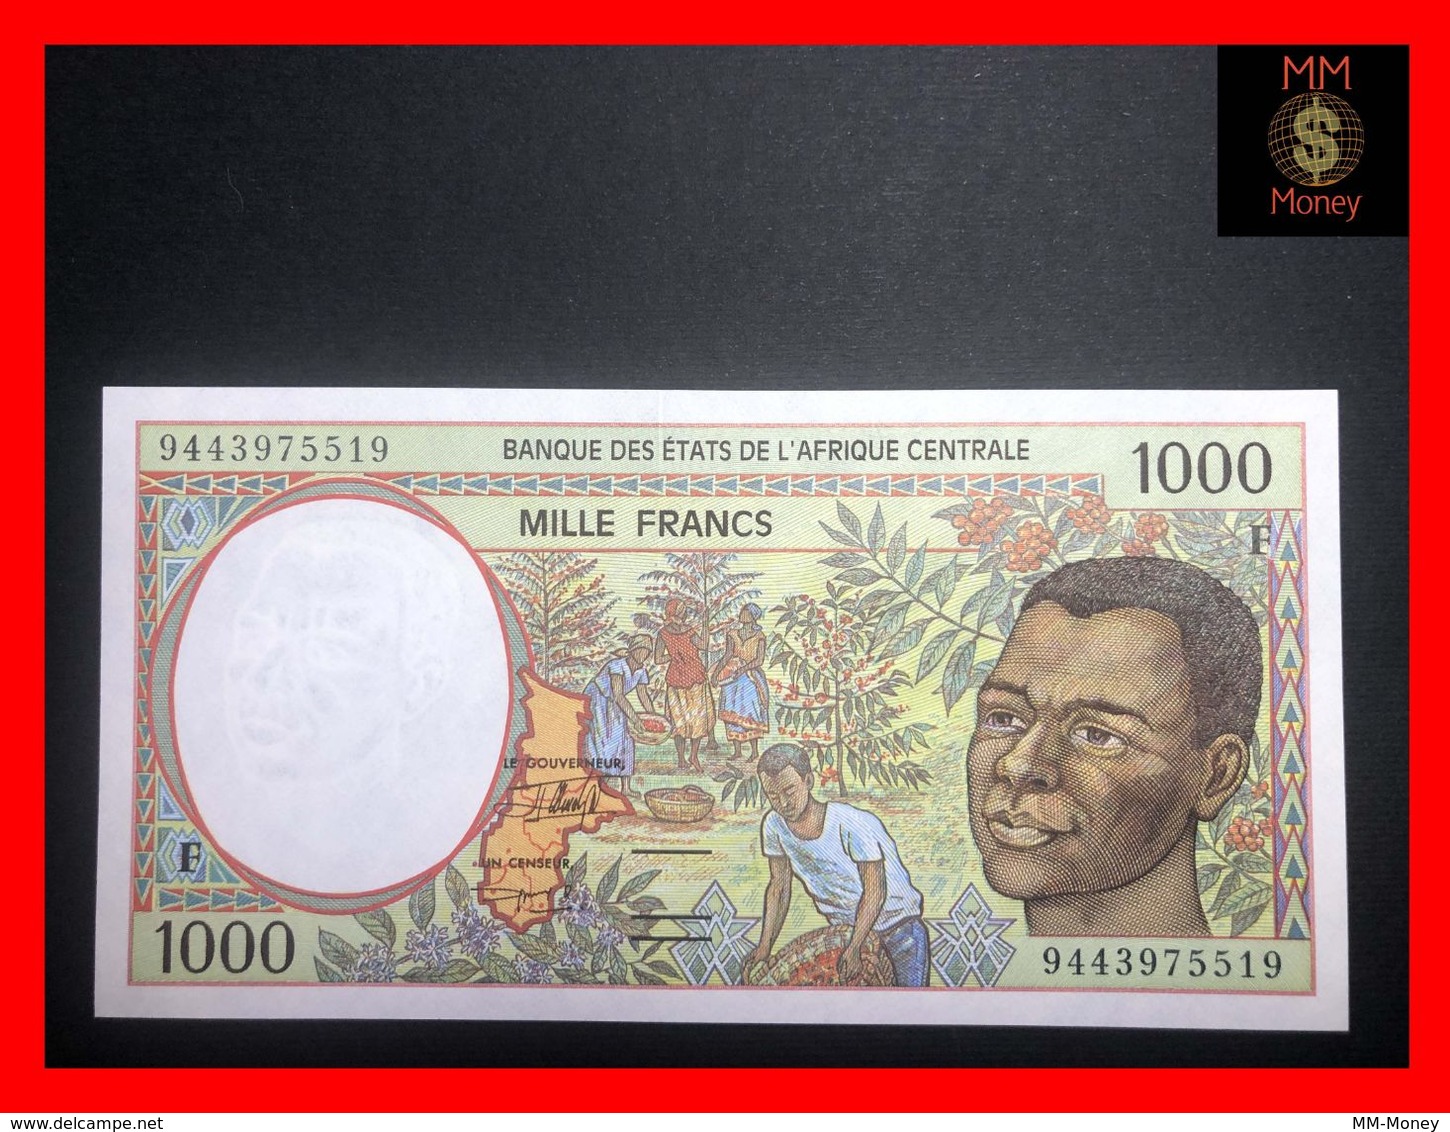 CENTRAL AFRICAN STATES  "F"  Central African Republic 1.000 1000 Francs 1994 P. 302 F  UNC - Central African States